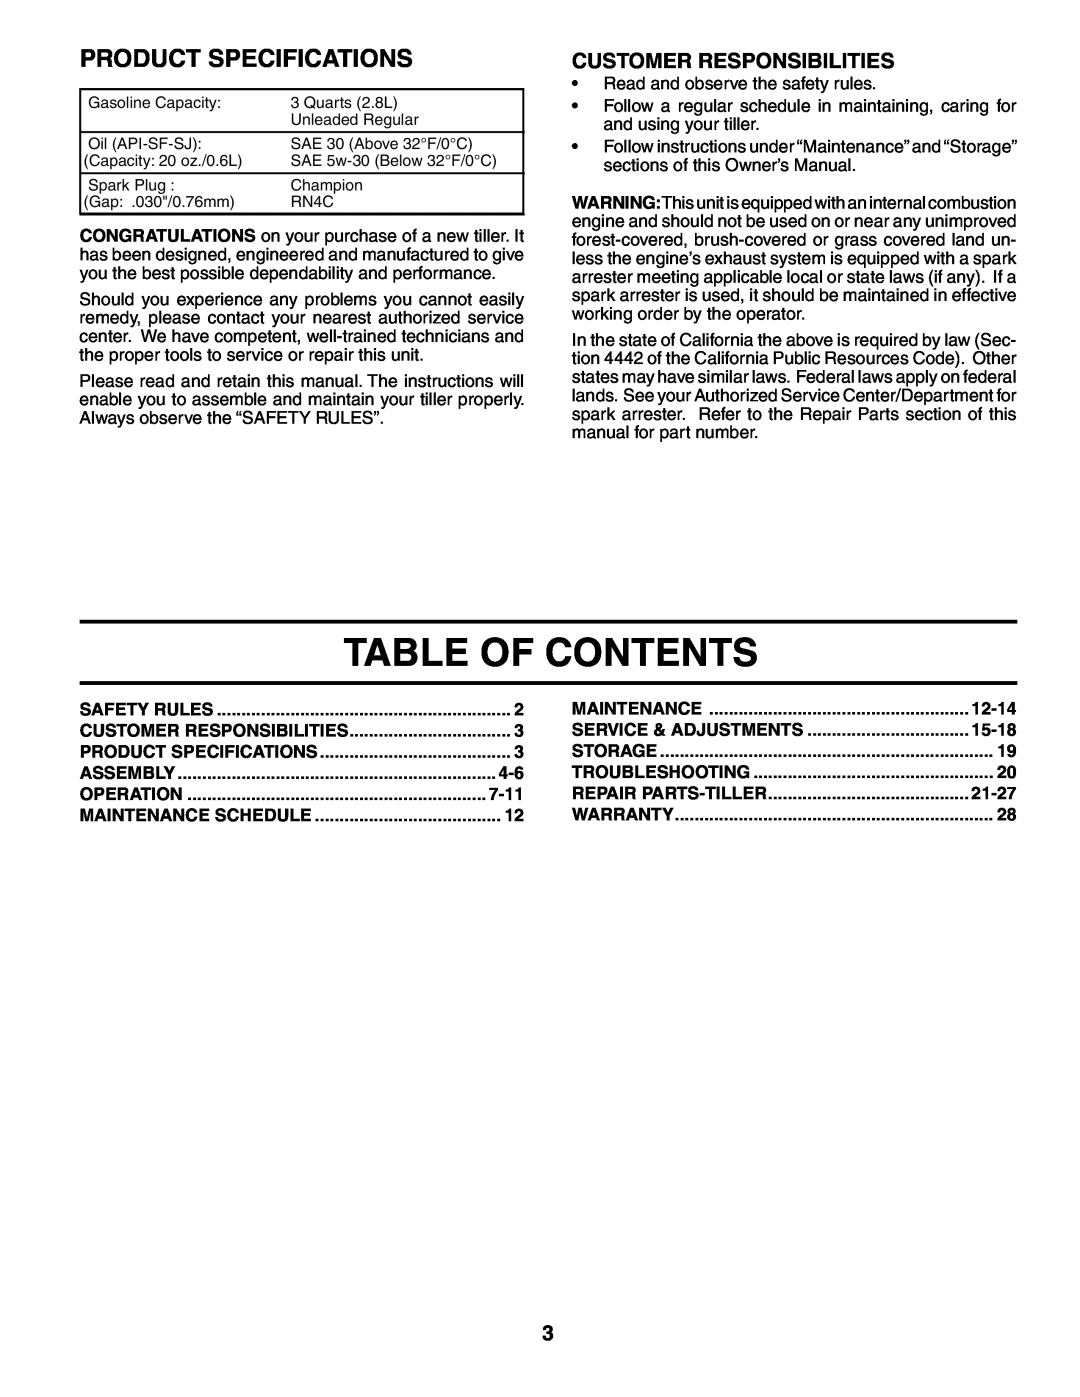 Weed Eater 186100 owner manual Table Of Contents, Product Specifications, Customer Responsibilities 